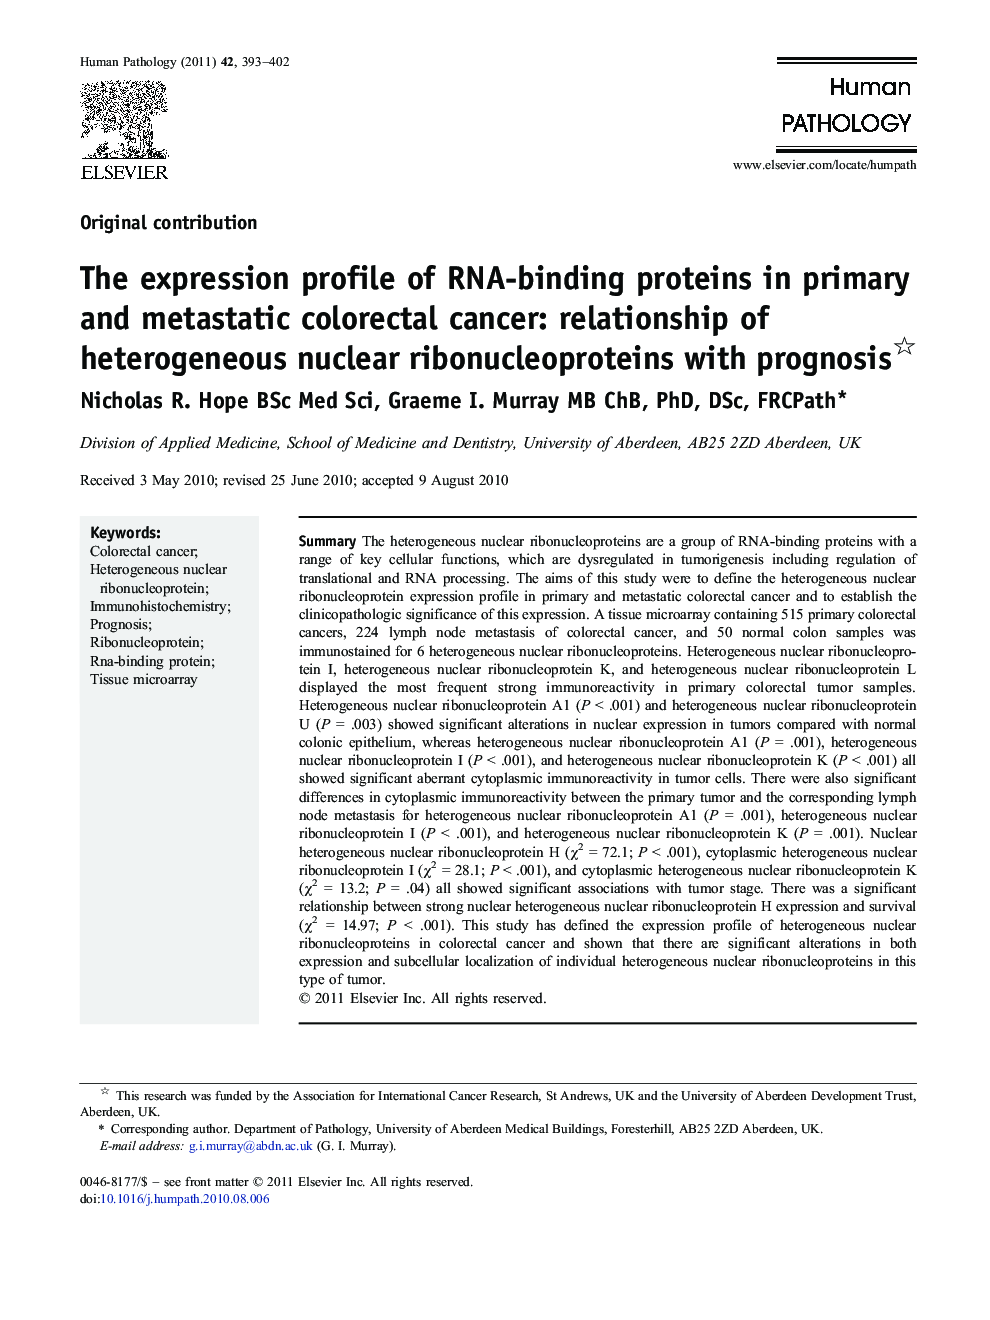 The expression profile of RNA-binding proteins in primary and metastatic colorectal cancer: relationship of heterogeneous nuclear ribonucleoproteins with prognosis 